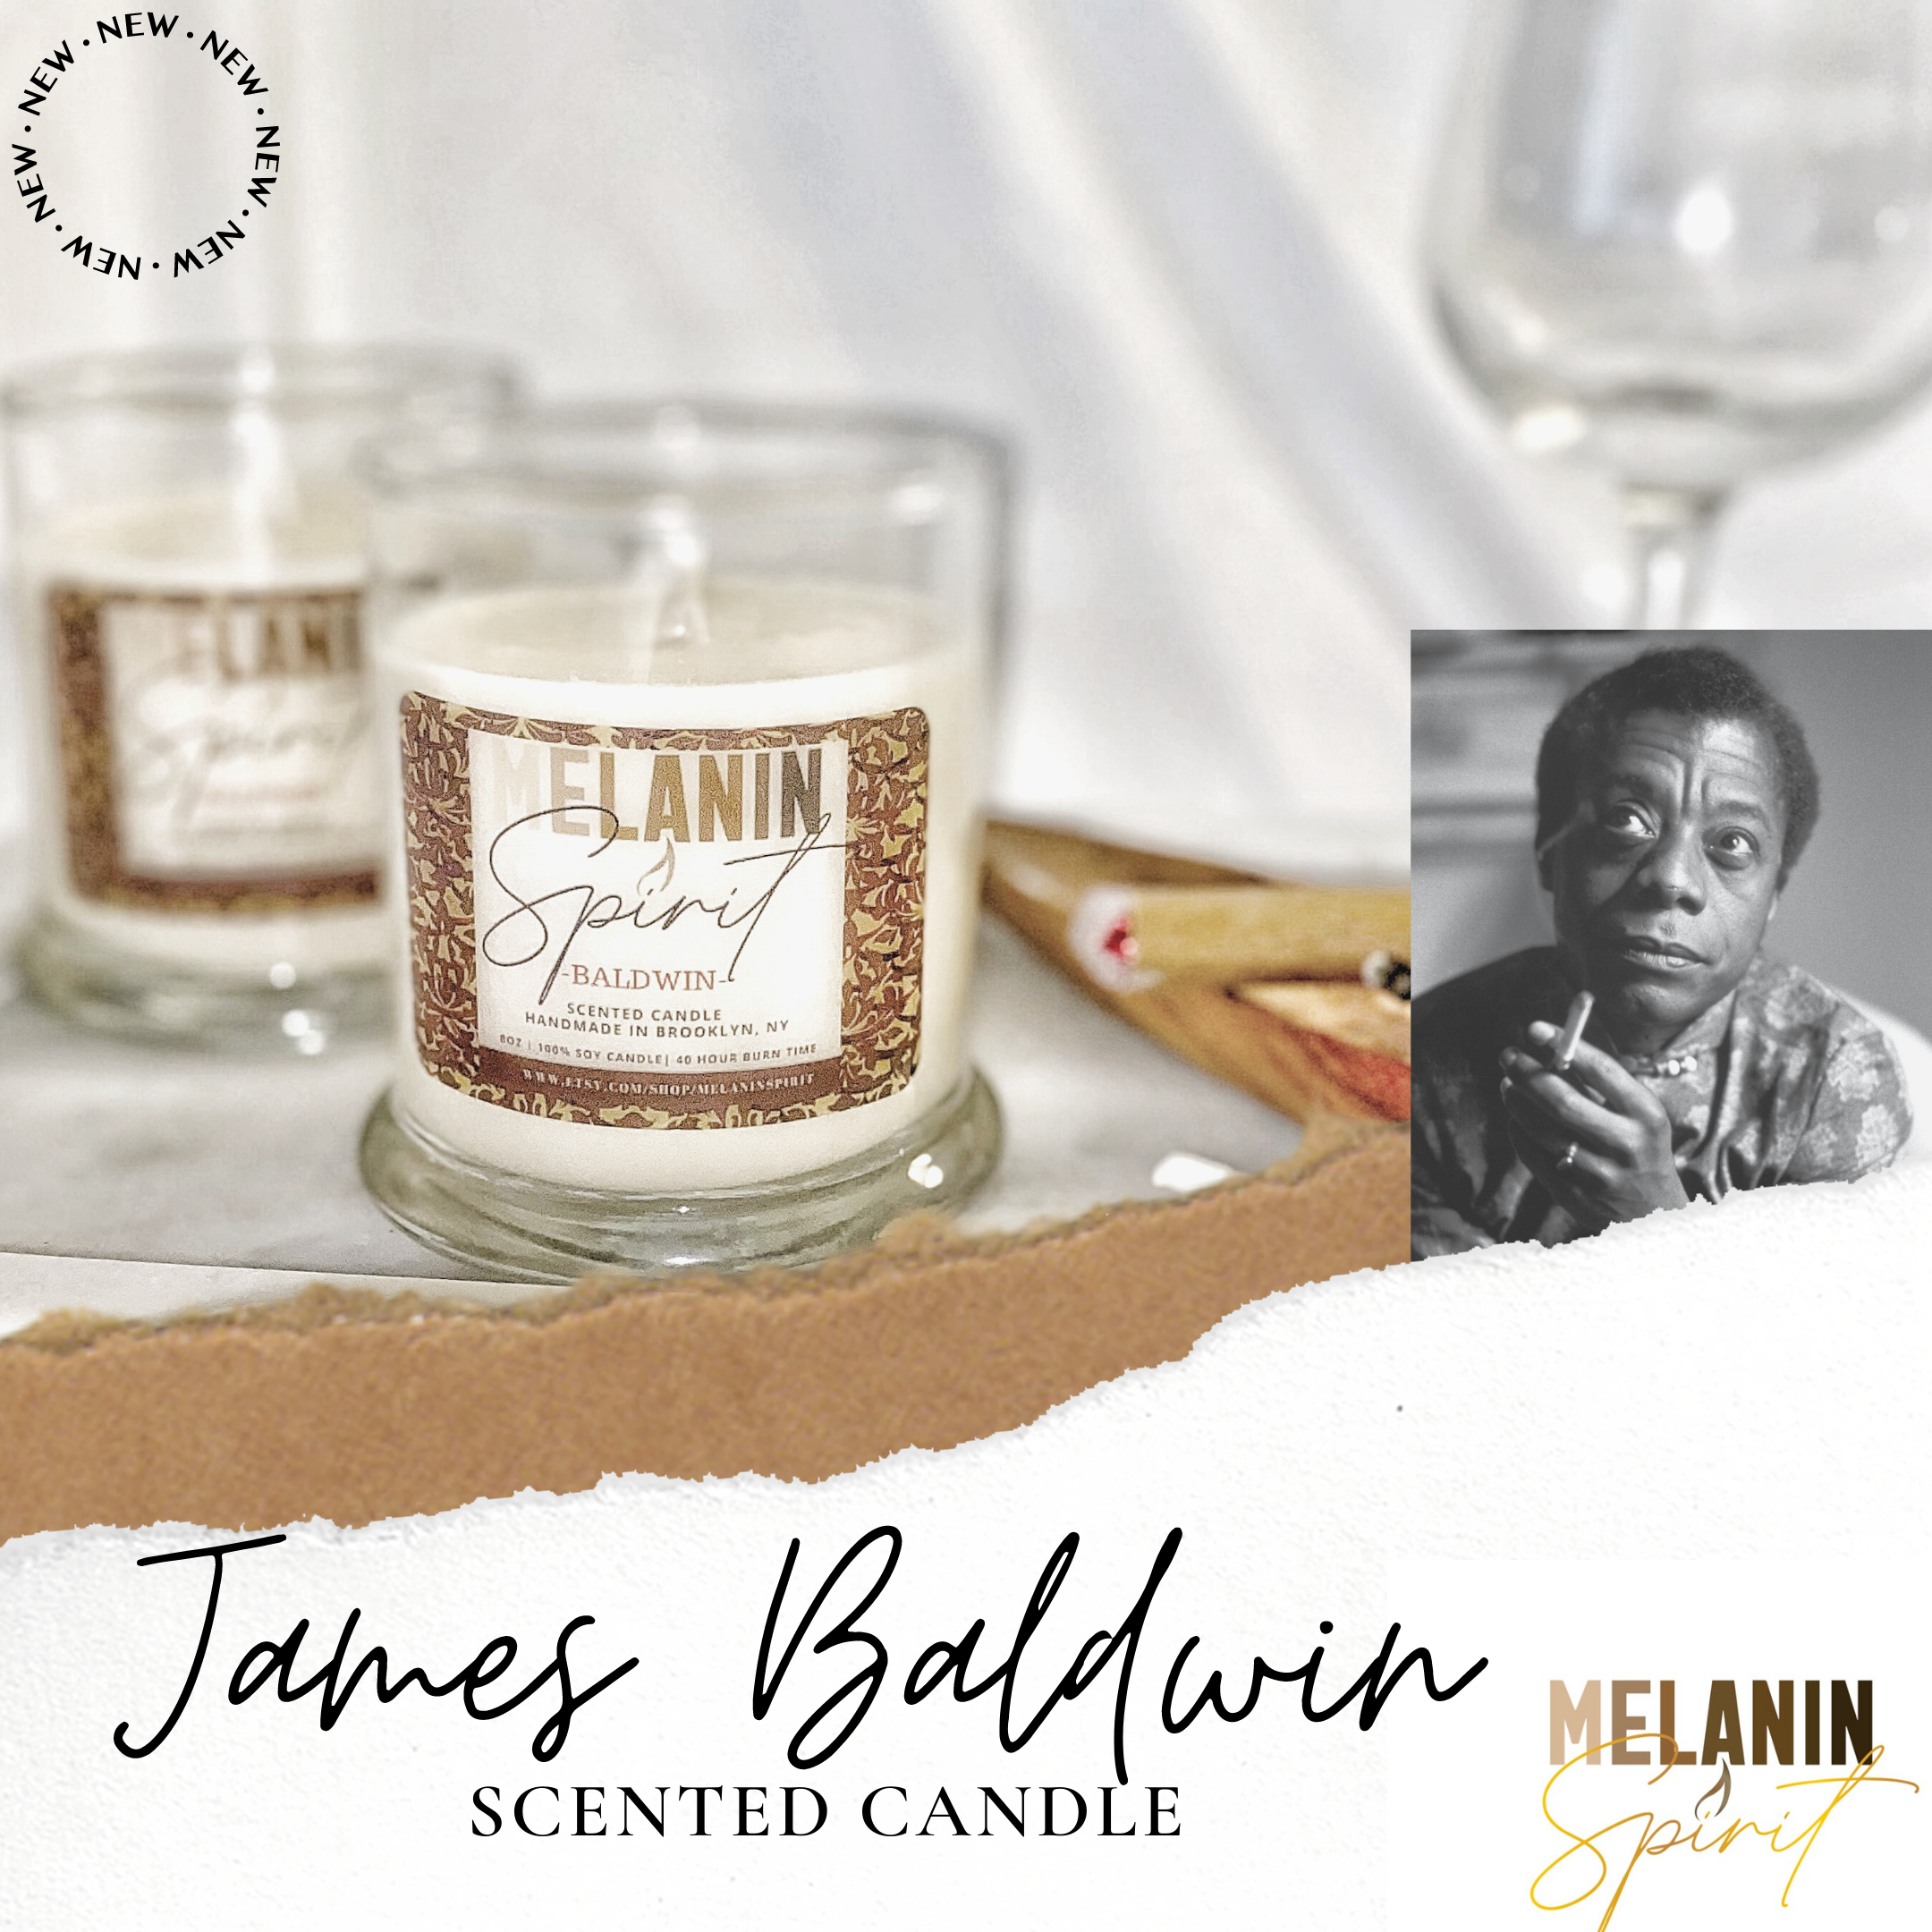 James "Baldwin" Scented Candle